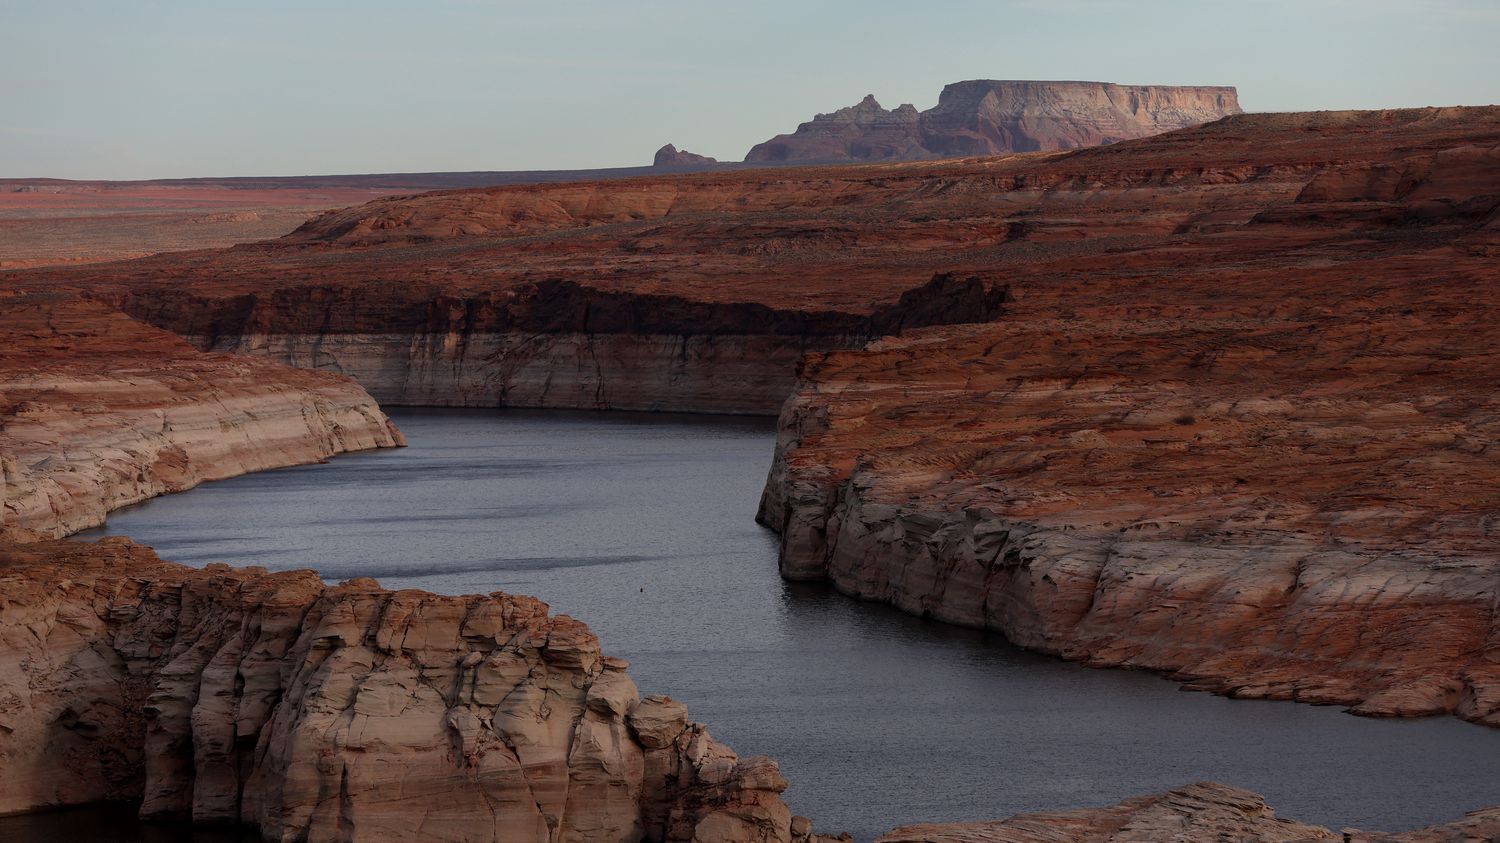 United States: after the drought, the American West faces a risk of exceptional floods
